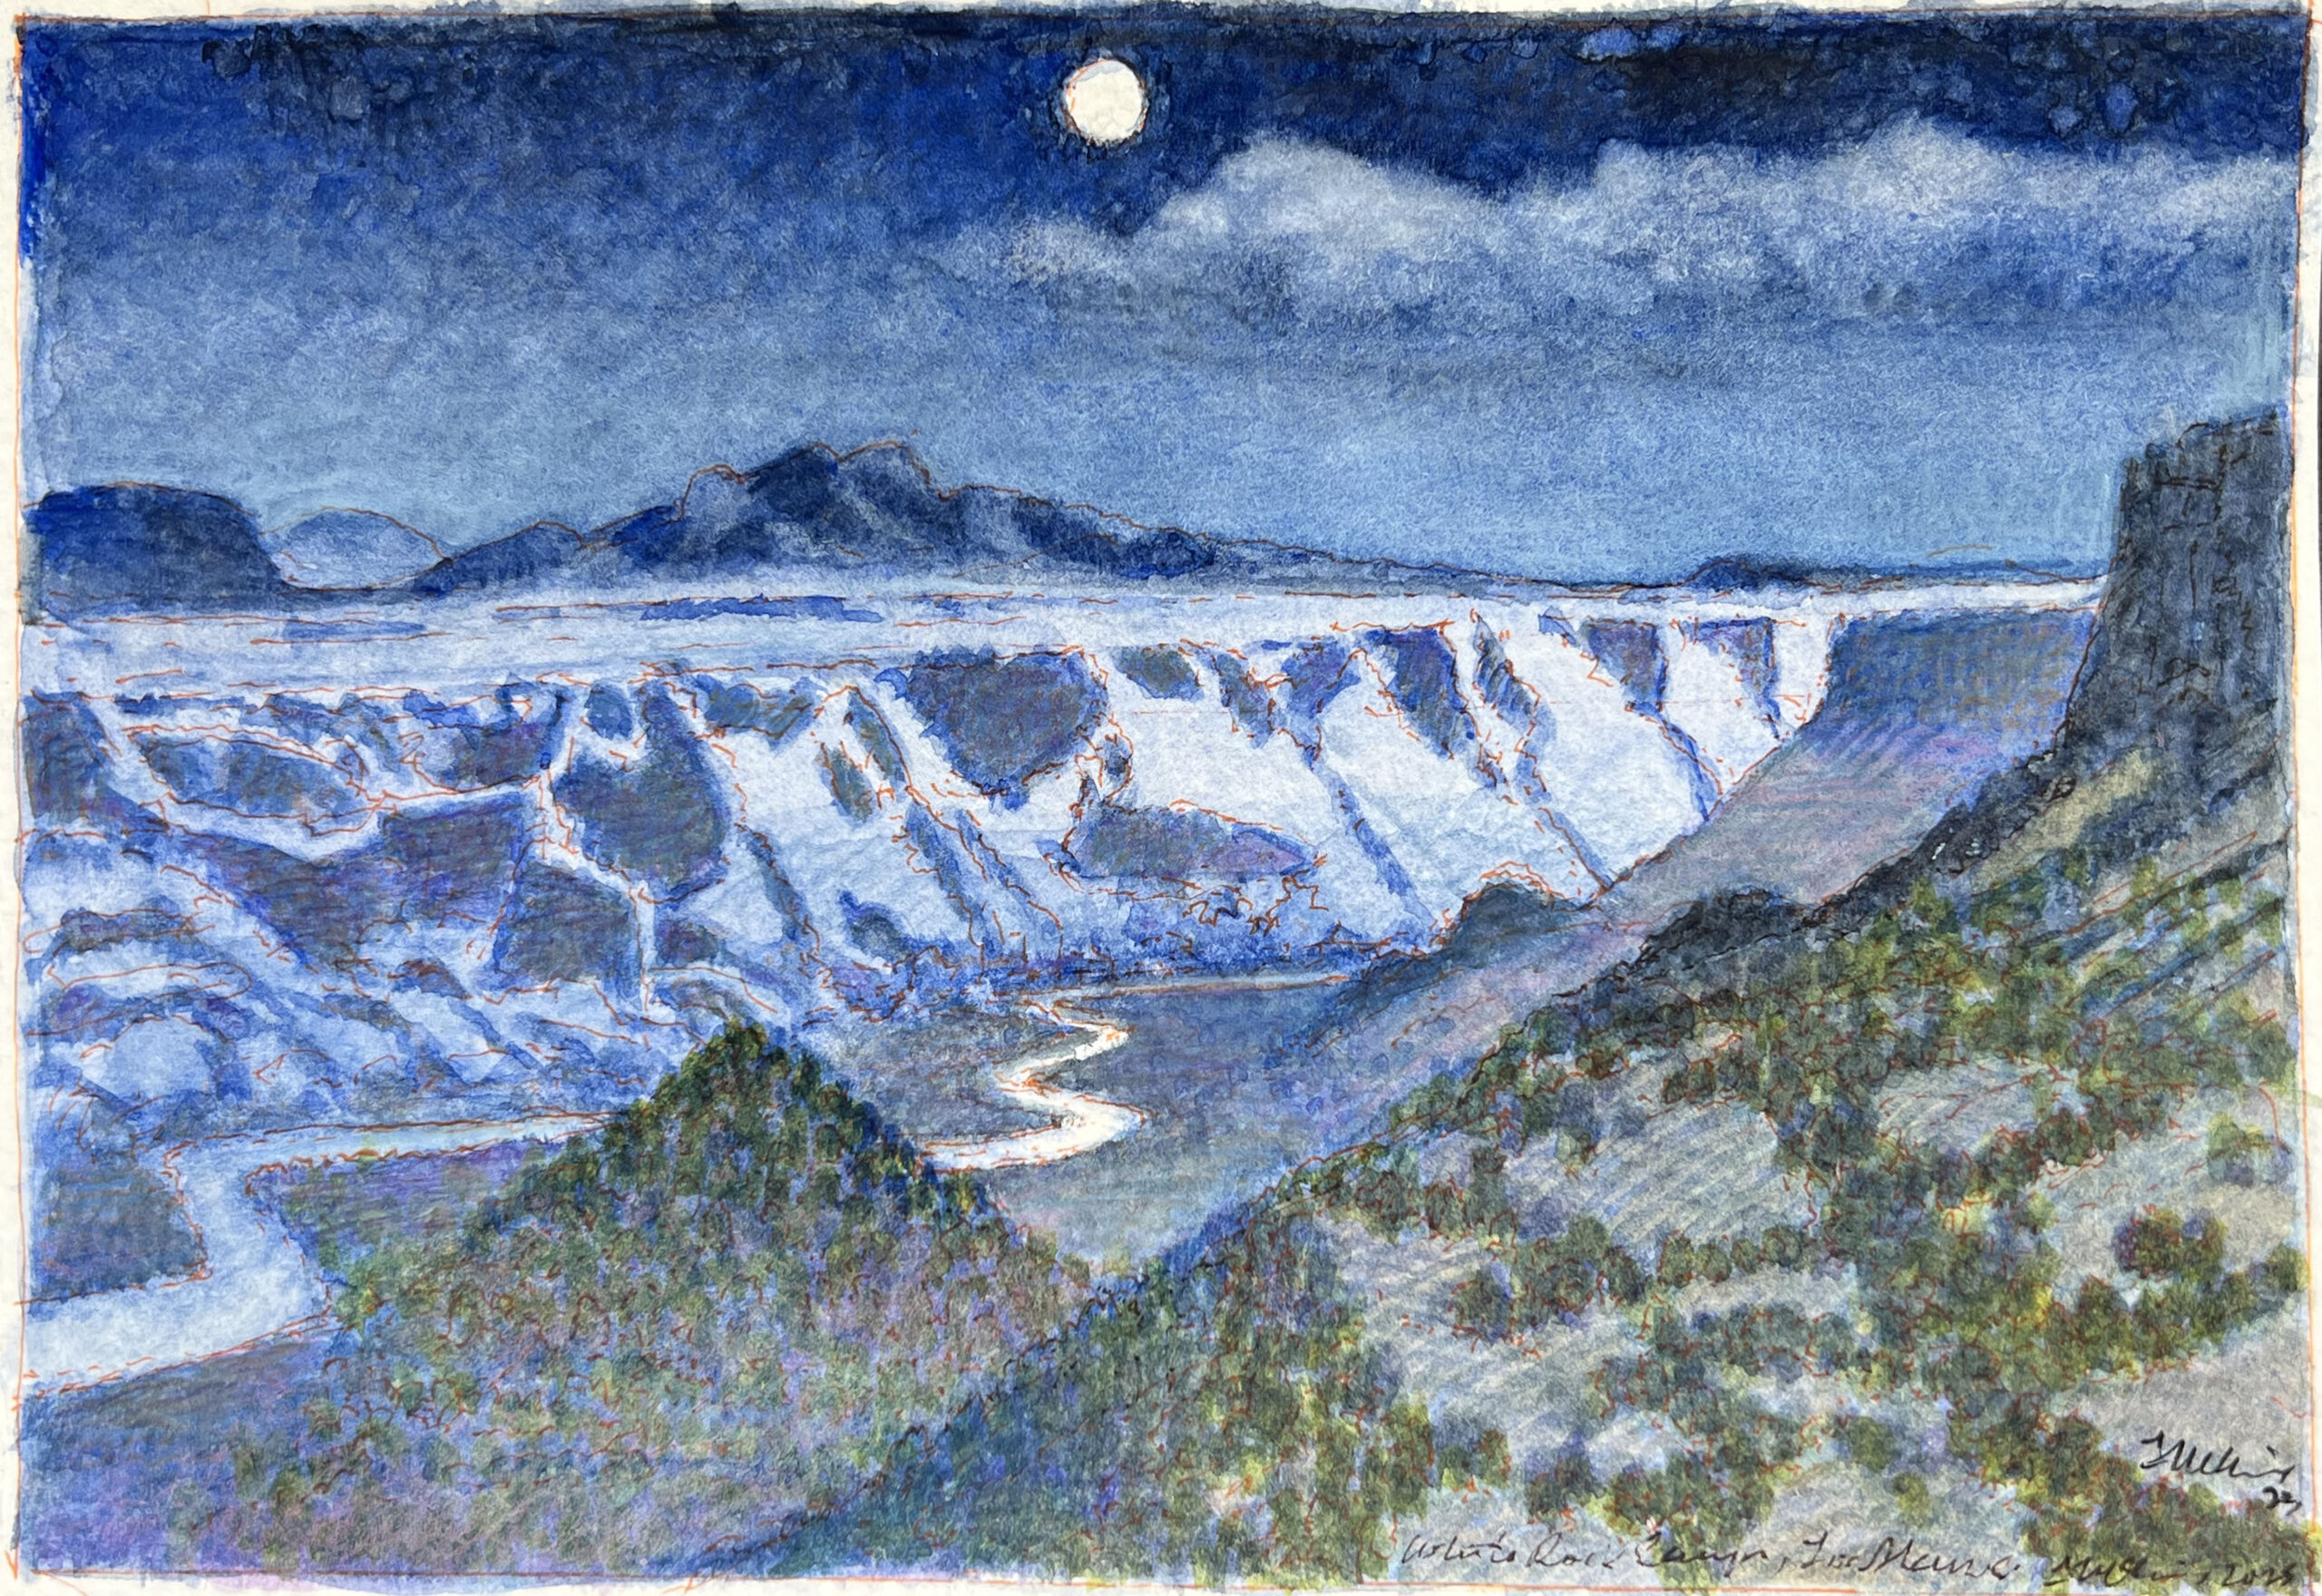 
		                					James McElhinney		                																	
																											<i>Moonrise: White Rock Canyon,</i>  
																																																					watercolor and mixed media on paper, 
																																								5 1/2 x 7 1/4 inches 
																								
		                				